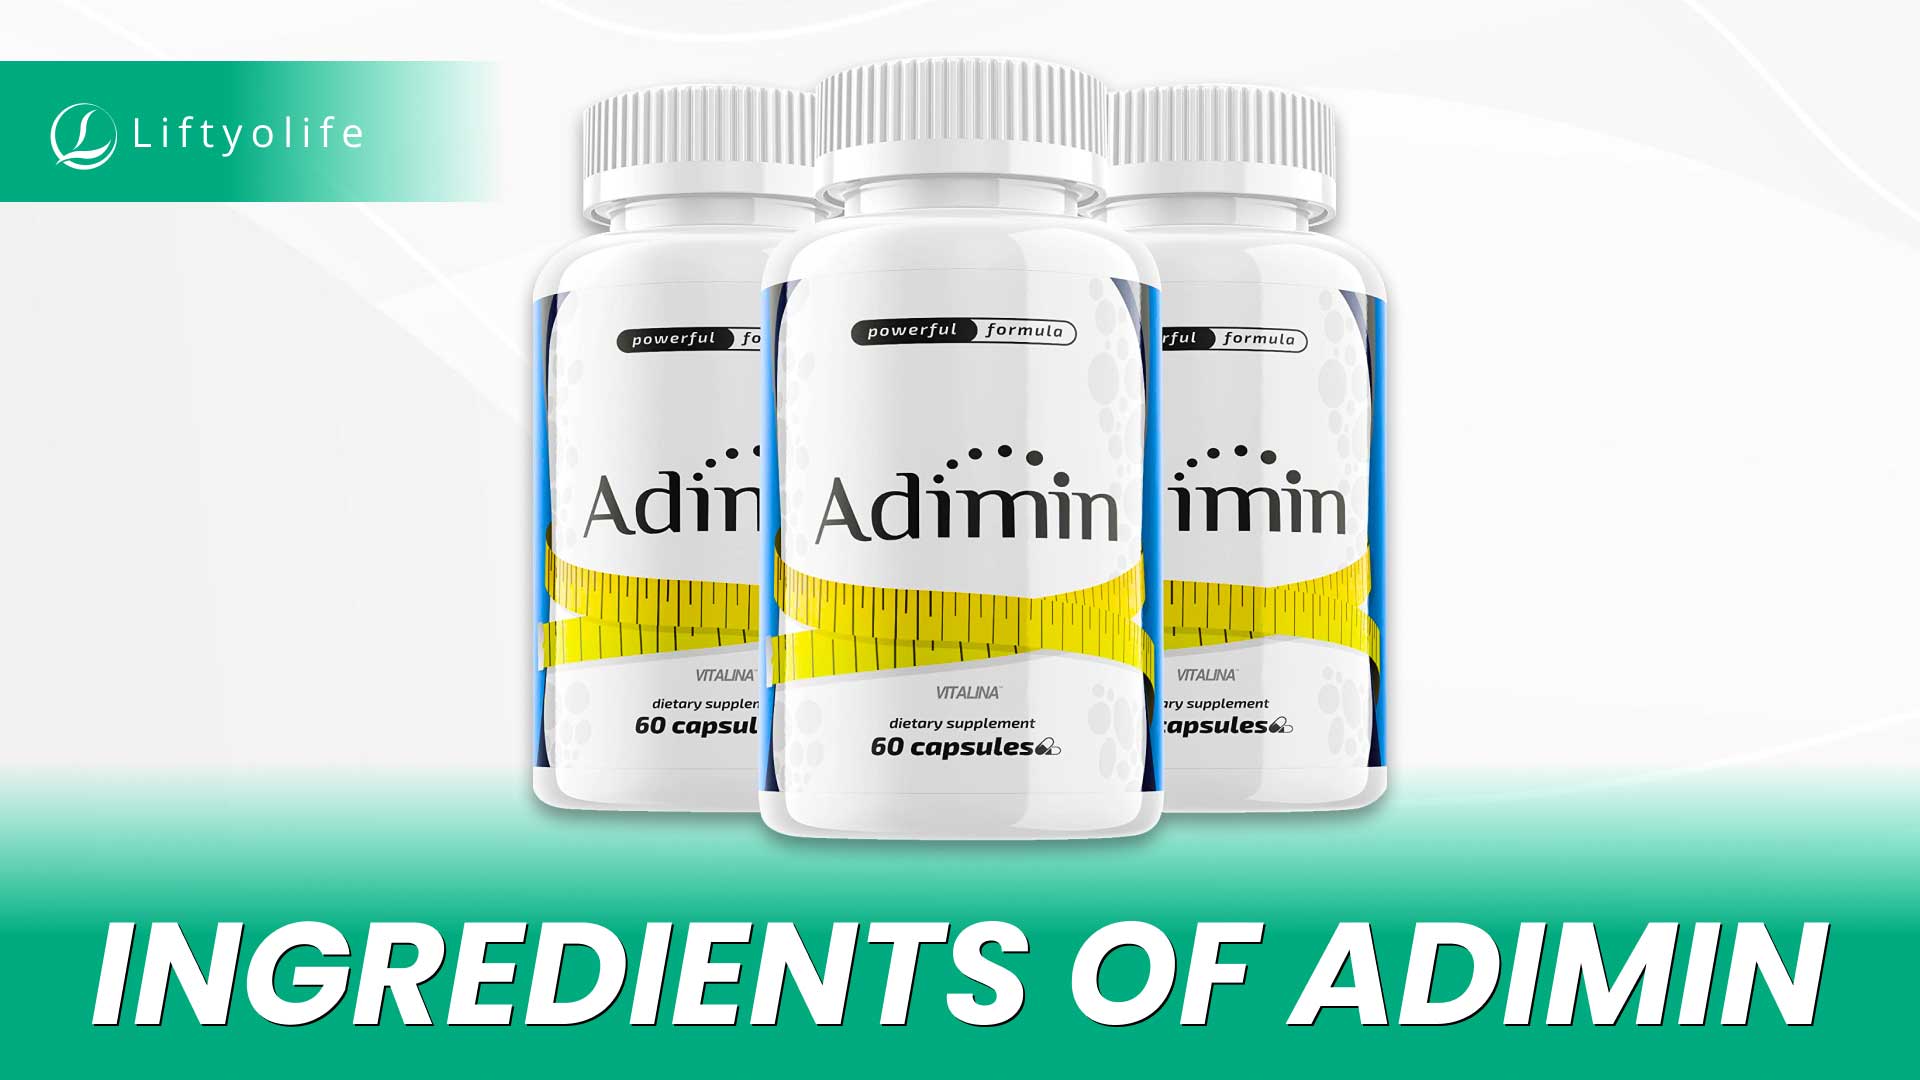 What Are The Ingredients Of Adimin?